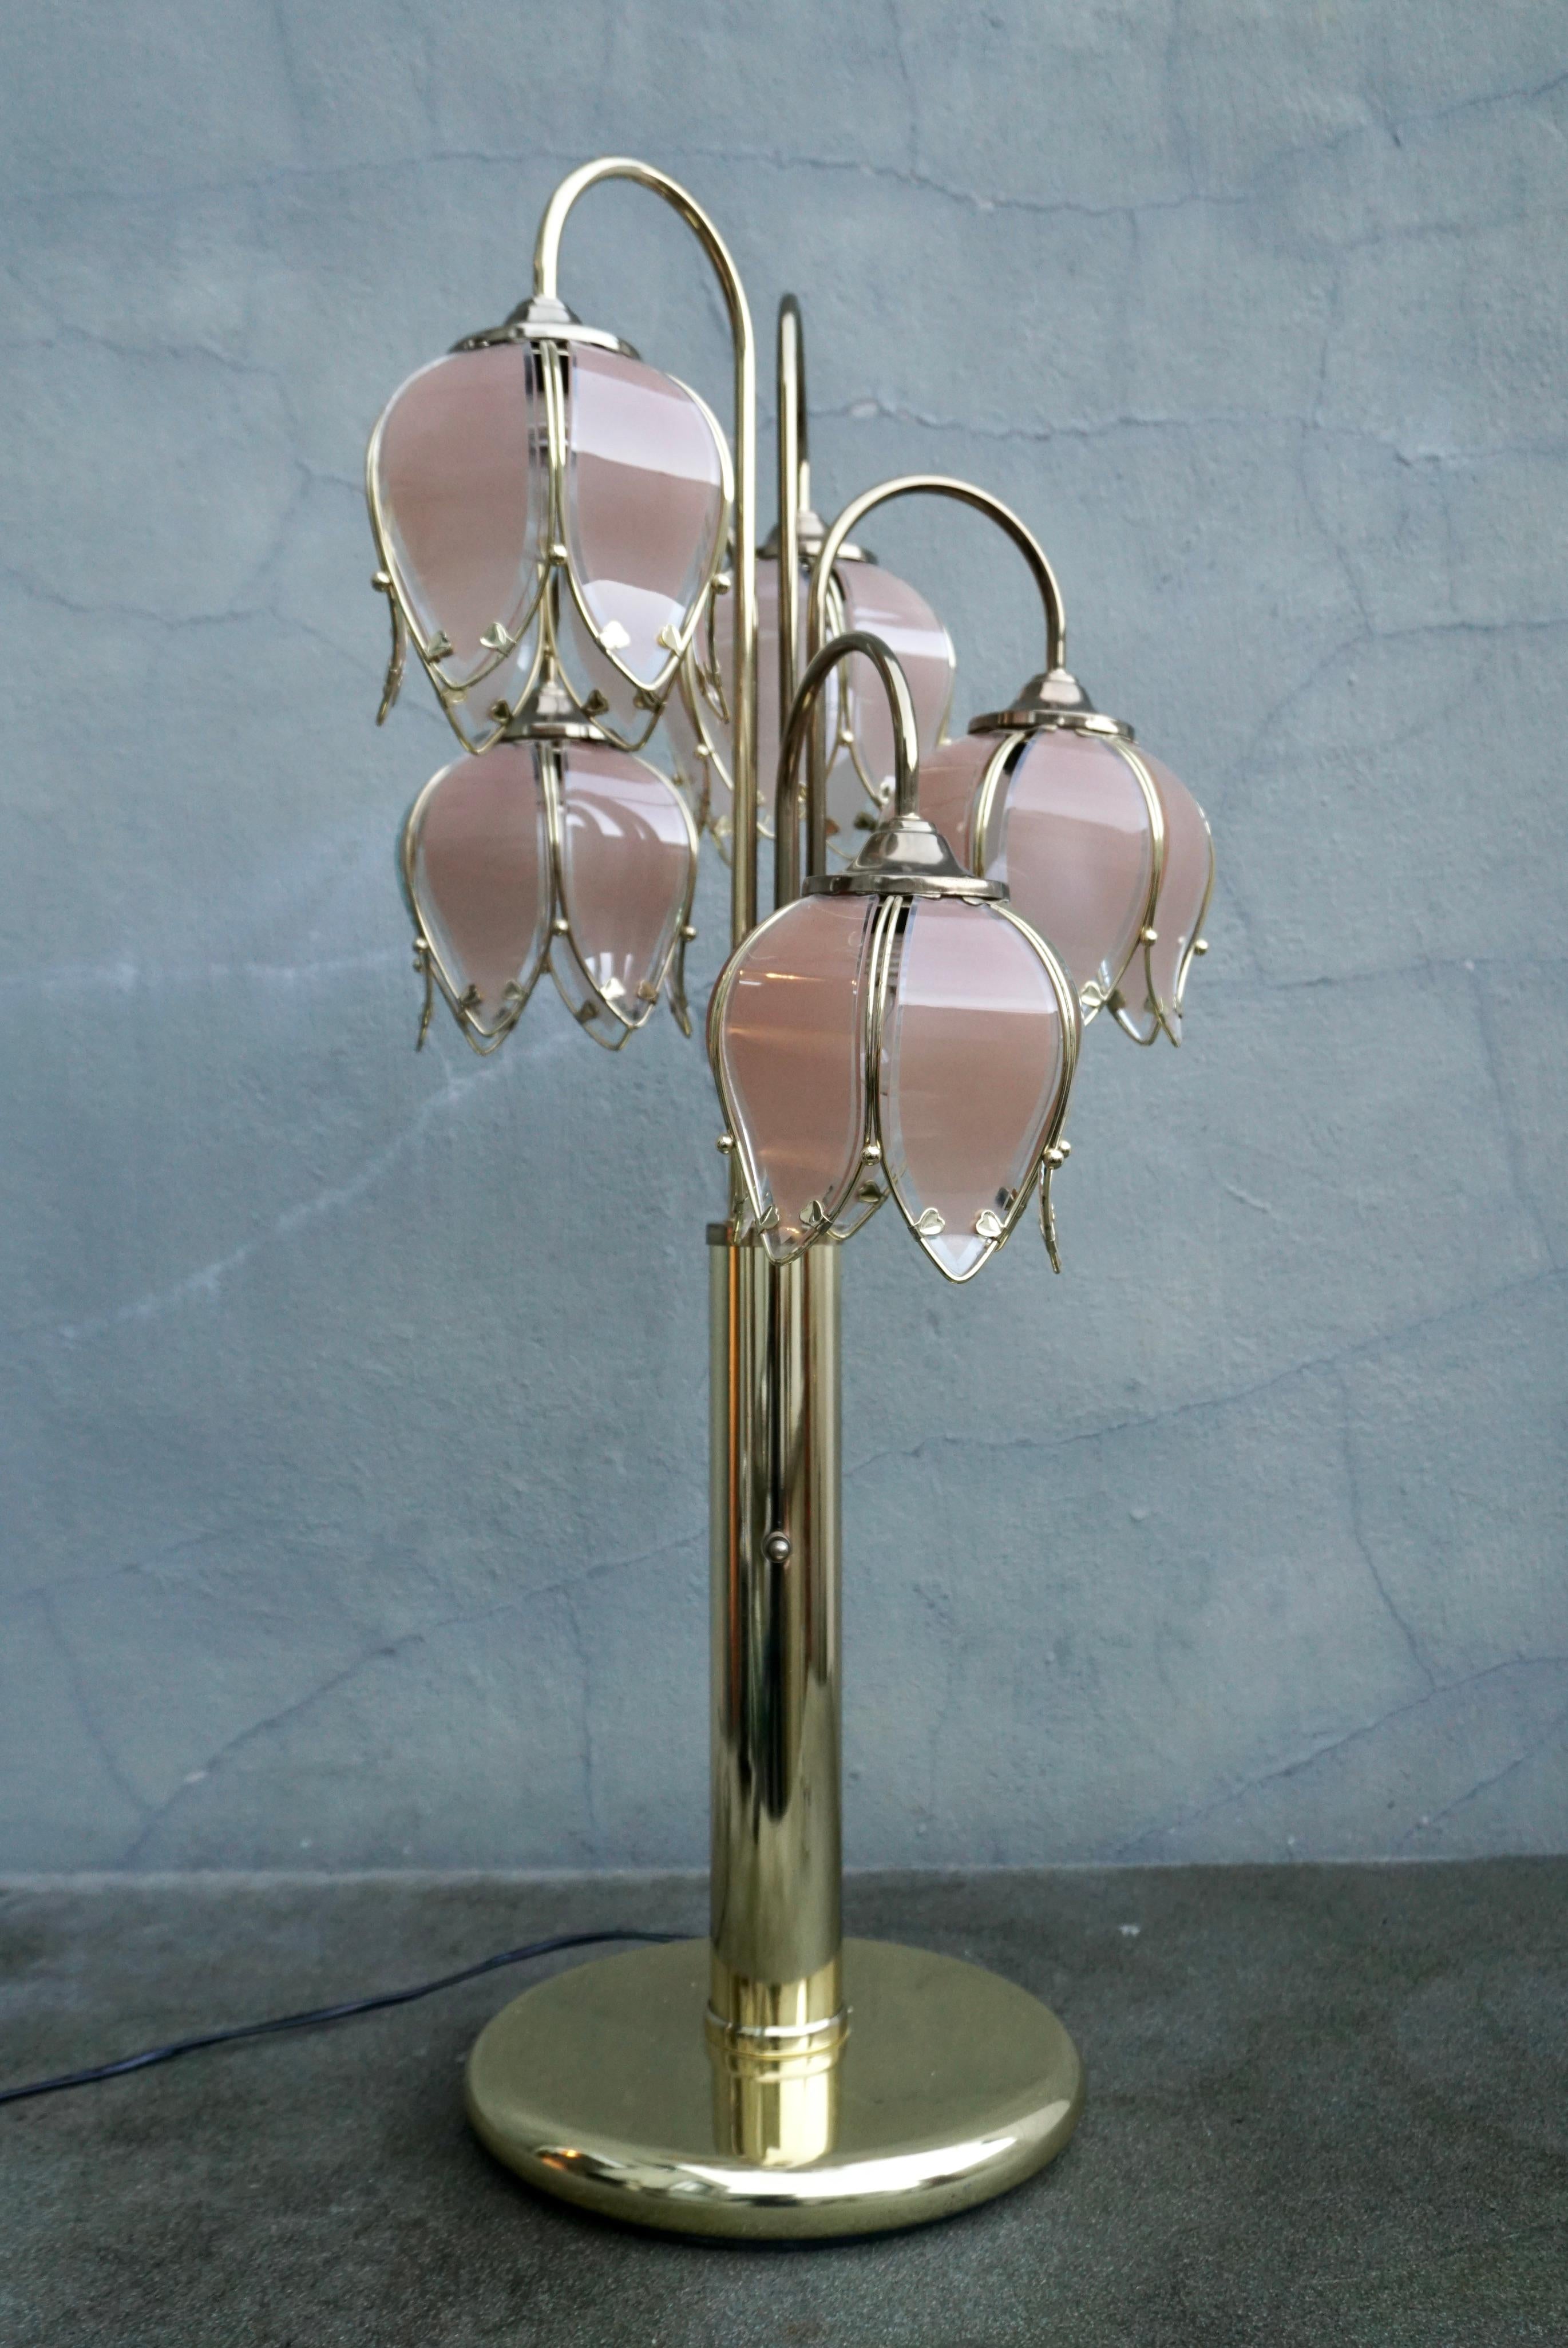 Hollywood Regency Mid-Century Modern Glass and Brass 5 Arm Lotus Lamp 1970s For Sale